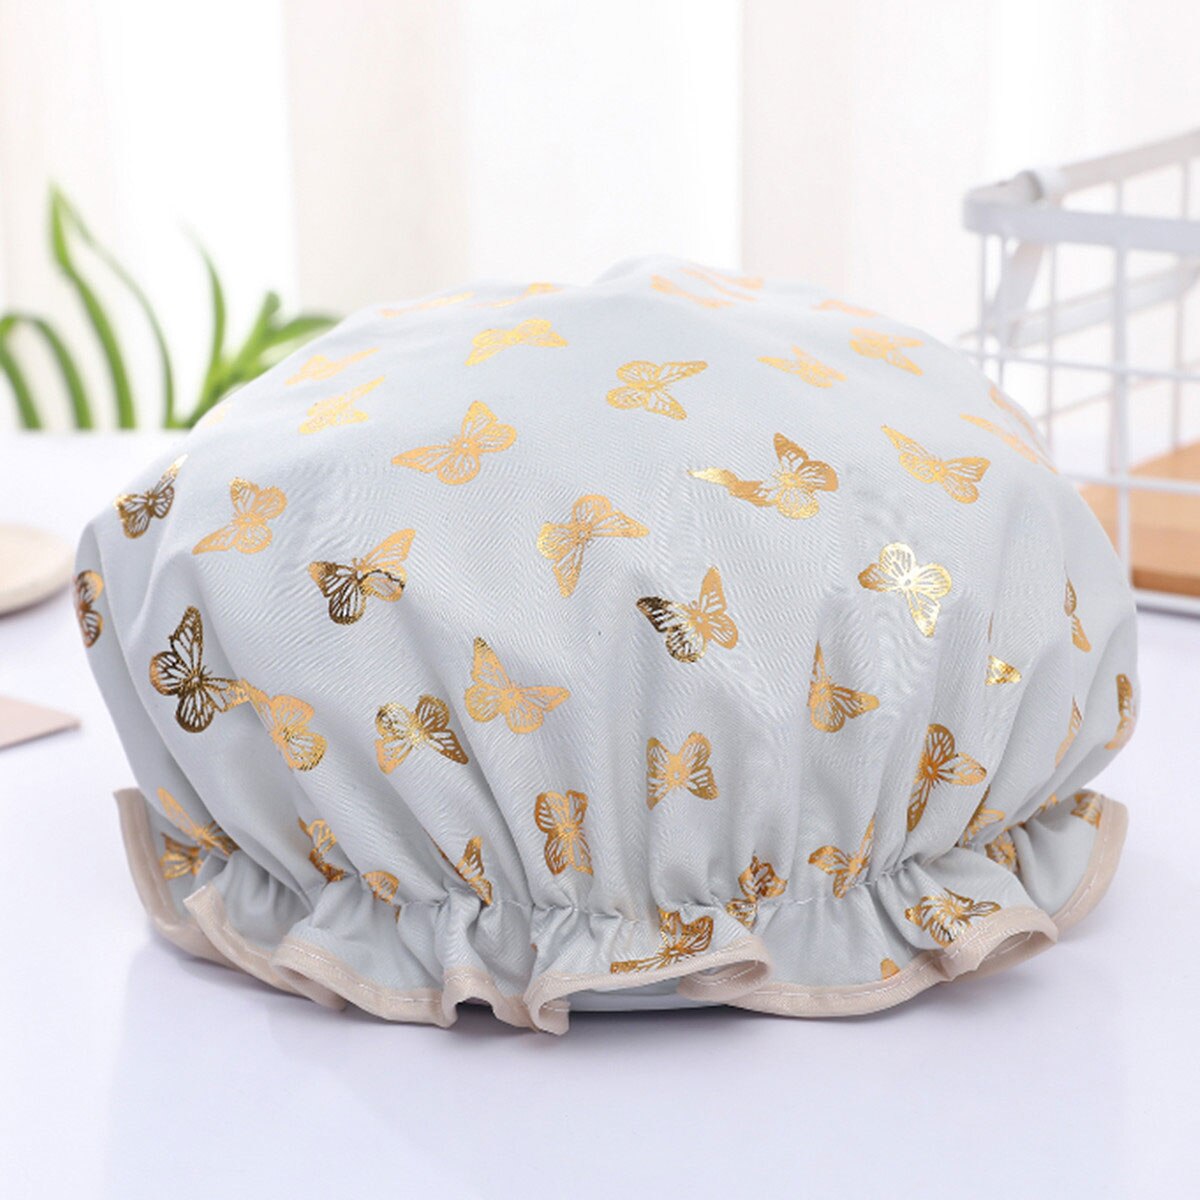 Ladies Hair Cap Hat Supplies Bathroom Double Layer Shower Waterproof Thick Cover Accessories 1pcs